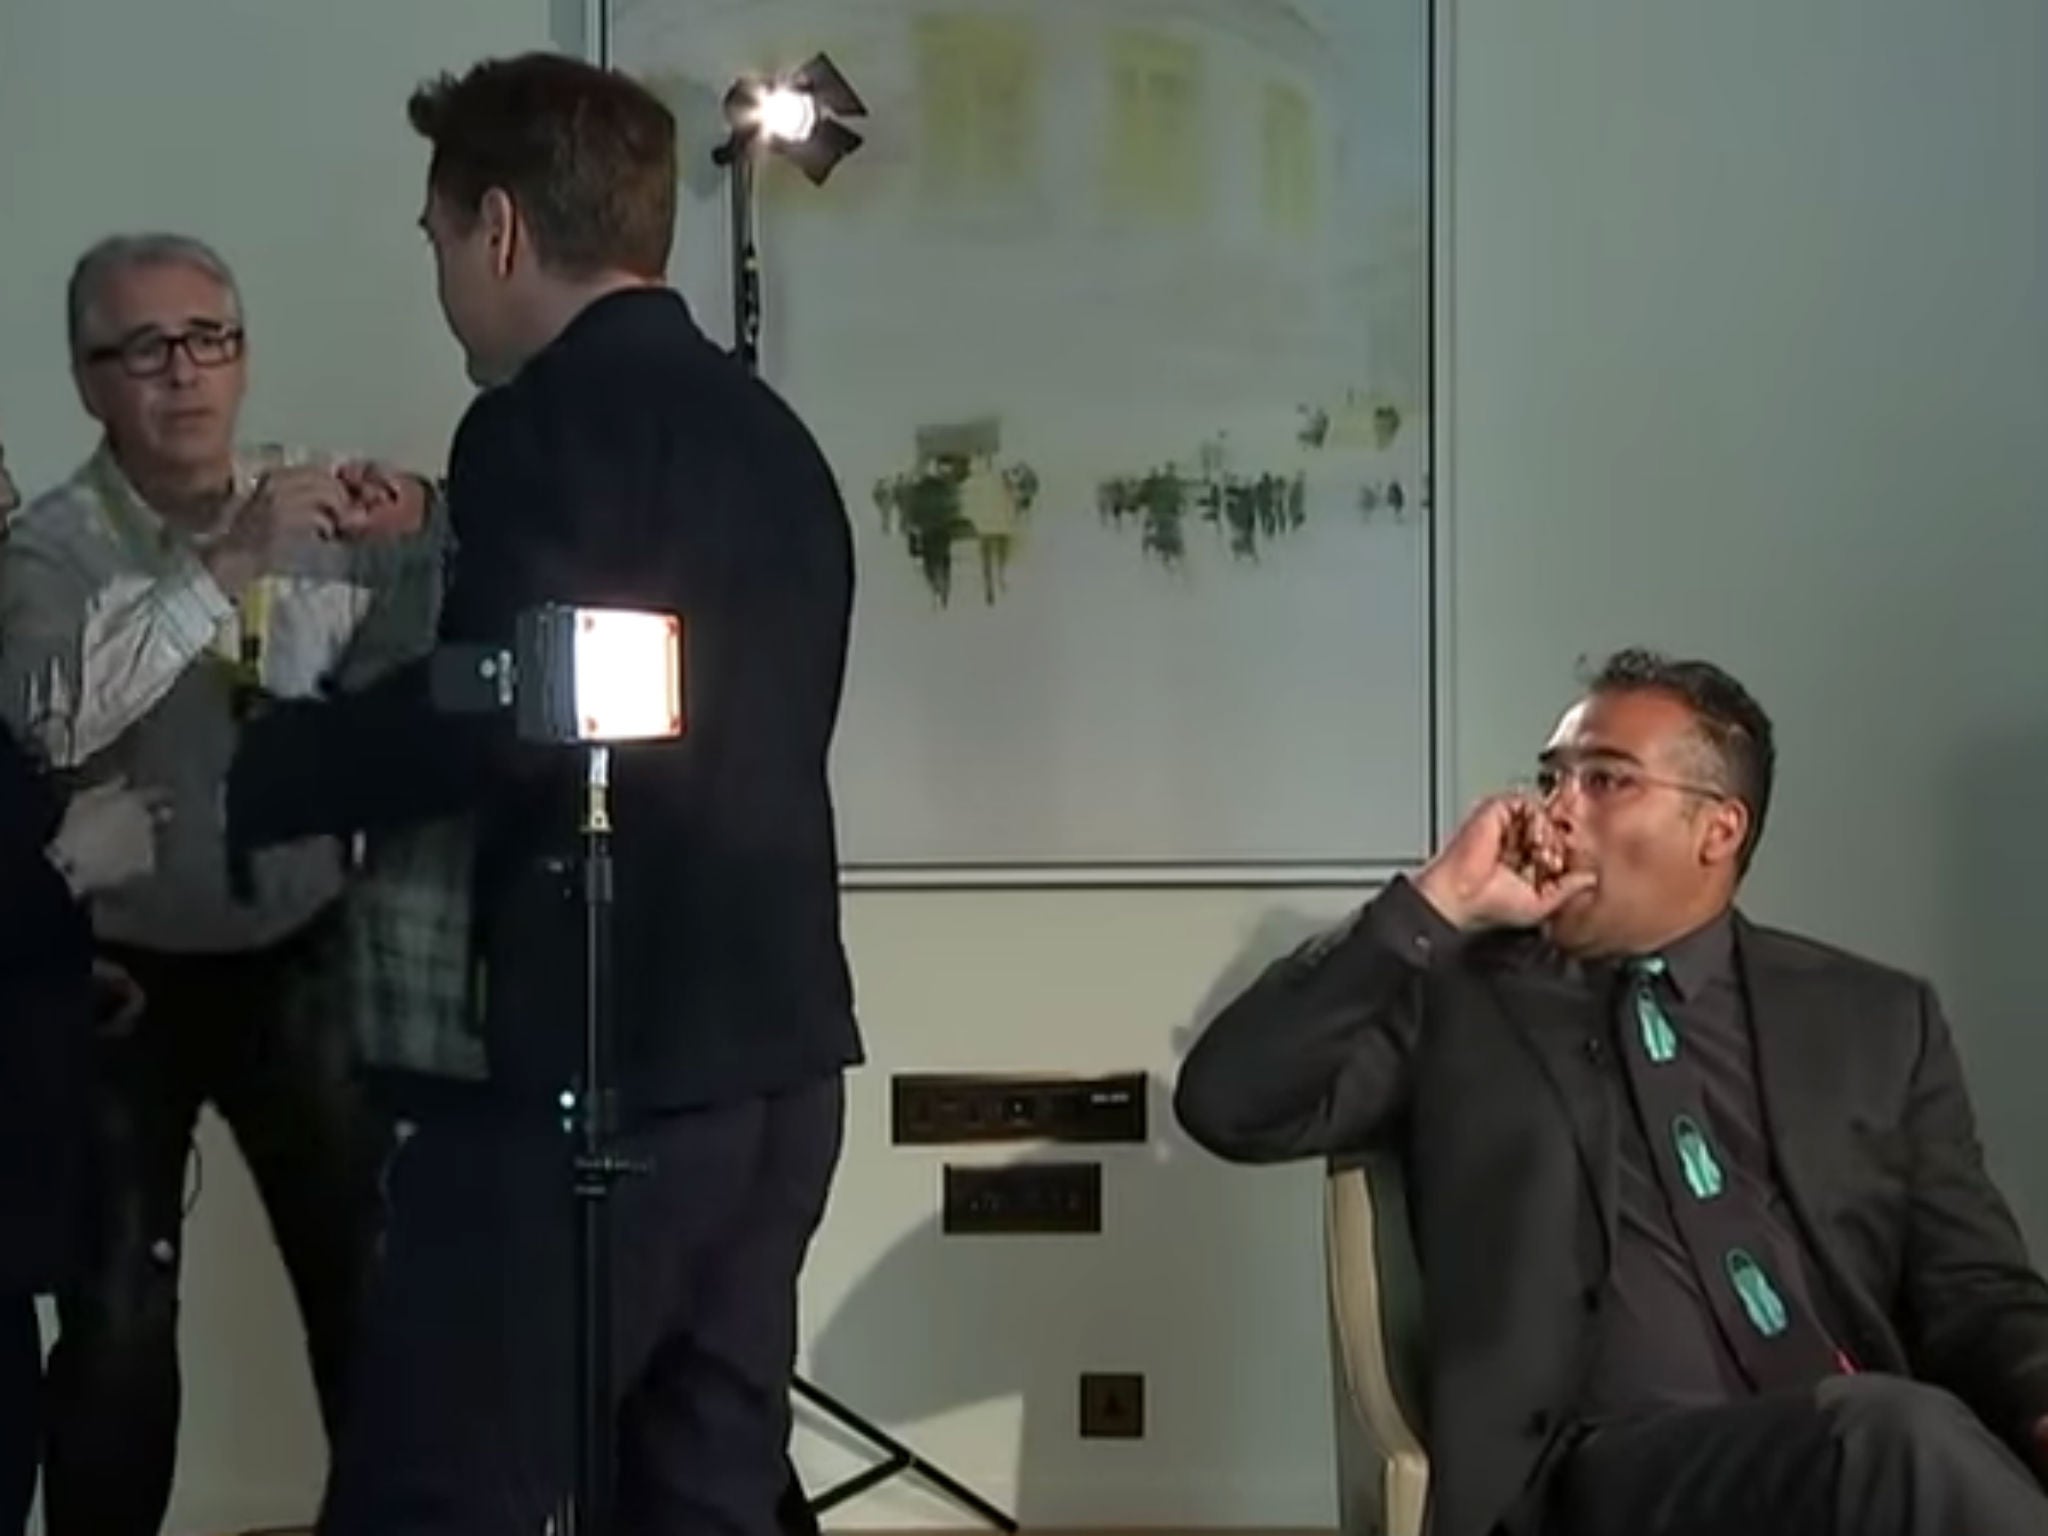 Robert Downey Jr storms out of an interview with Krishnan Guru-Murthy. His face says it all